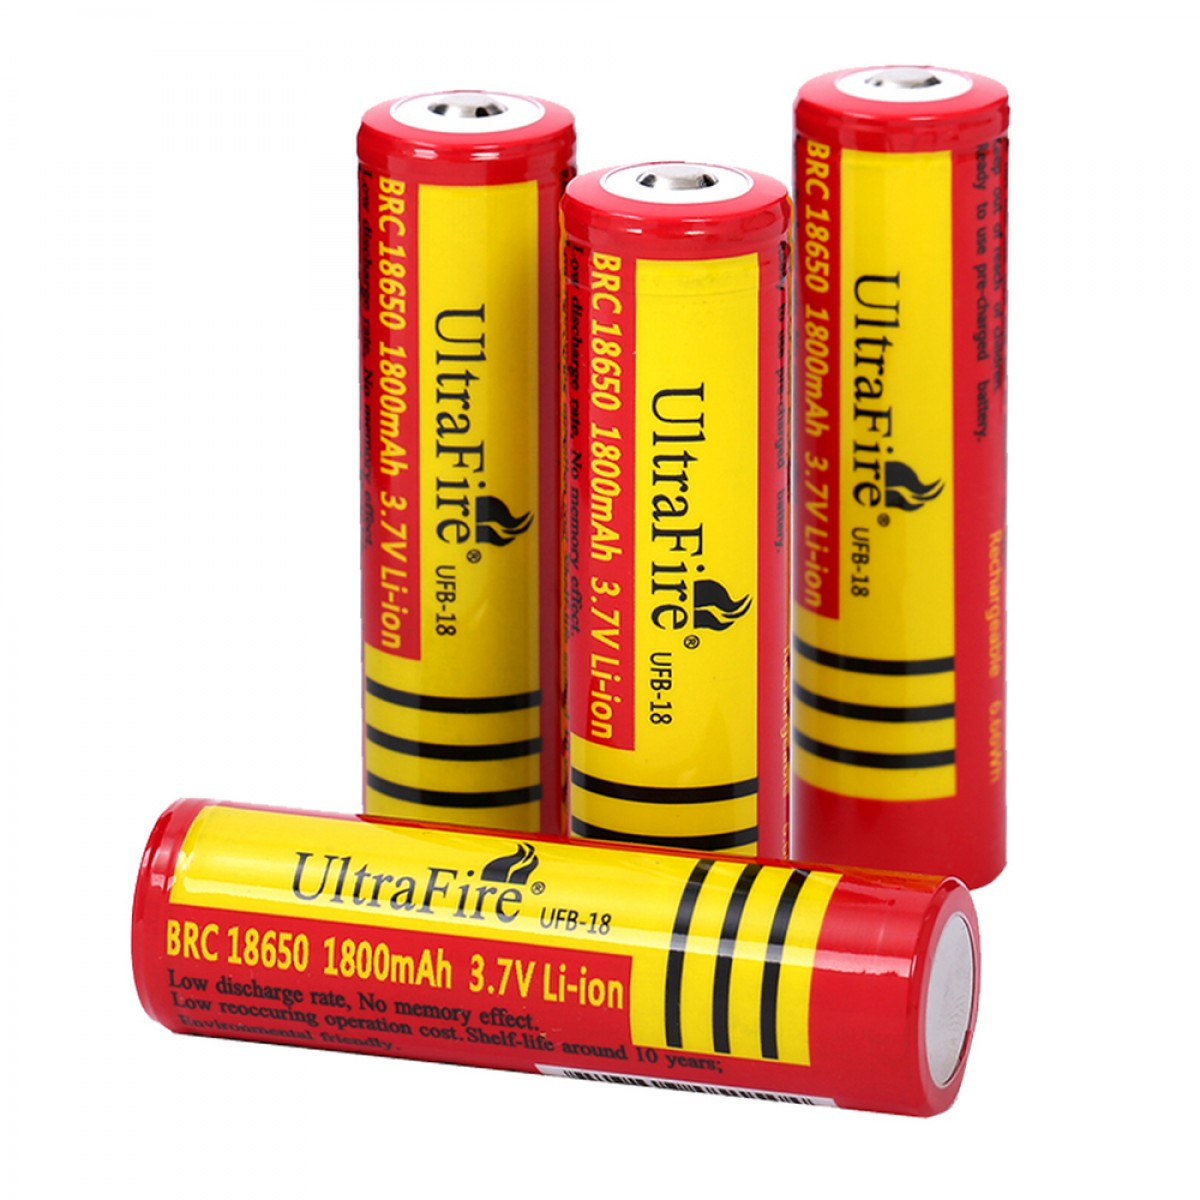 UltraFire 1800mAh 3.7V 18650 Li-ion Rechargeable Battery Without Protection Board (2PCS)